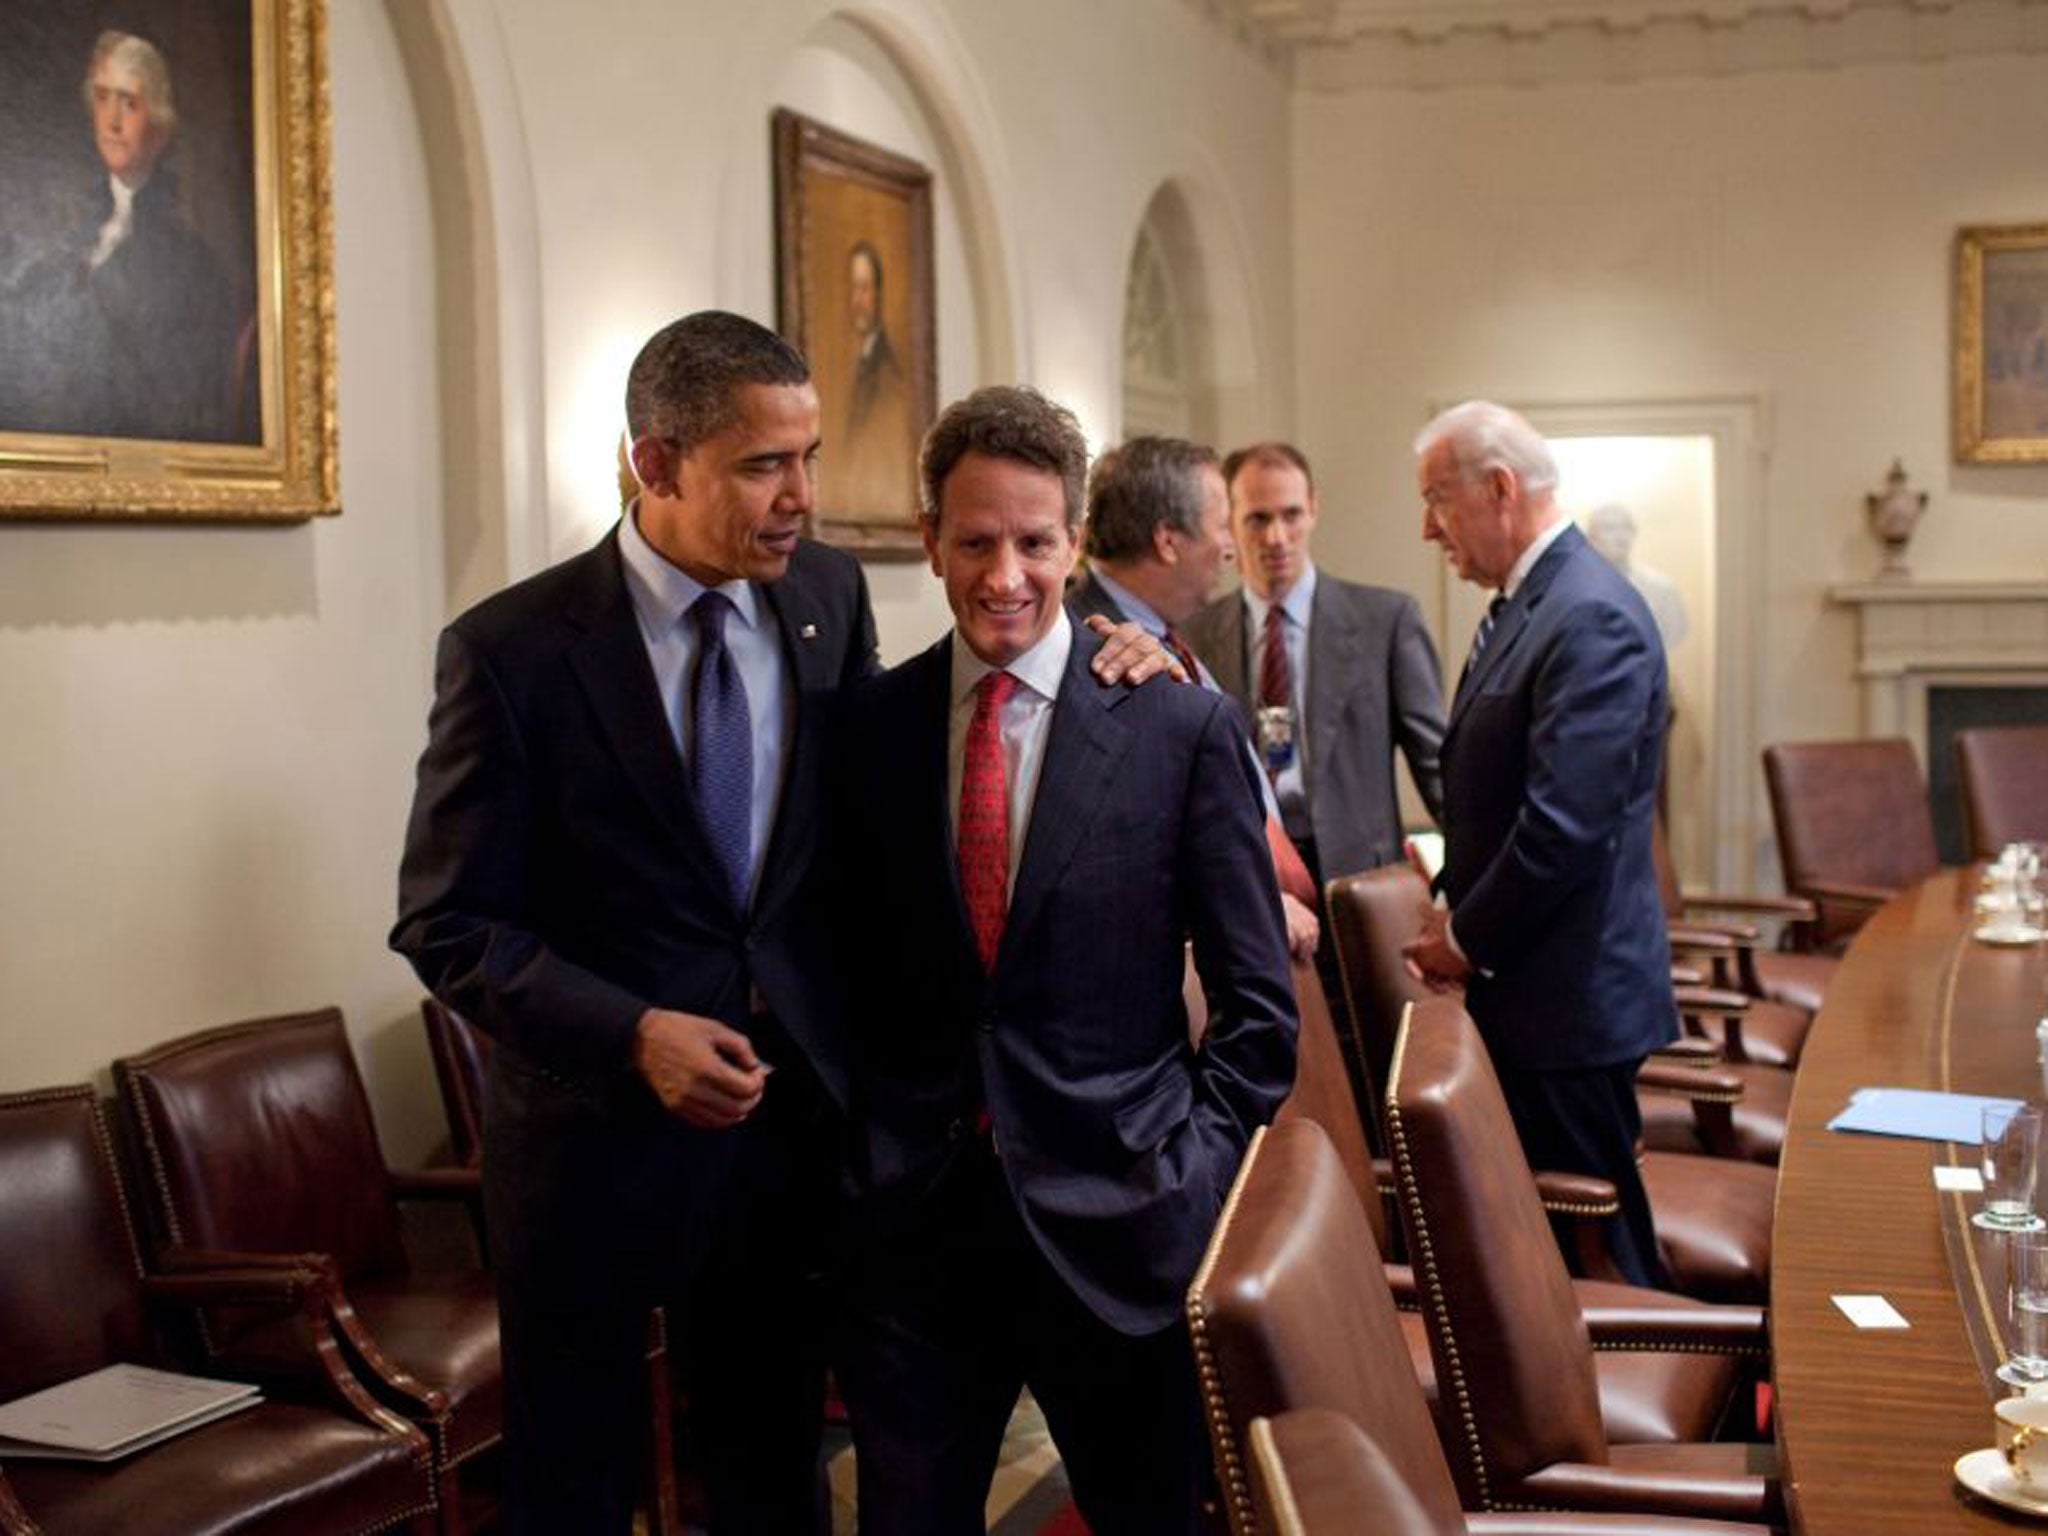 President Barack Obama may be forced to accept the imminent departure of his Treasury Secretary, Tim Geithner